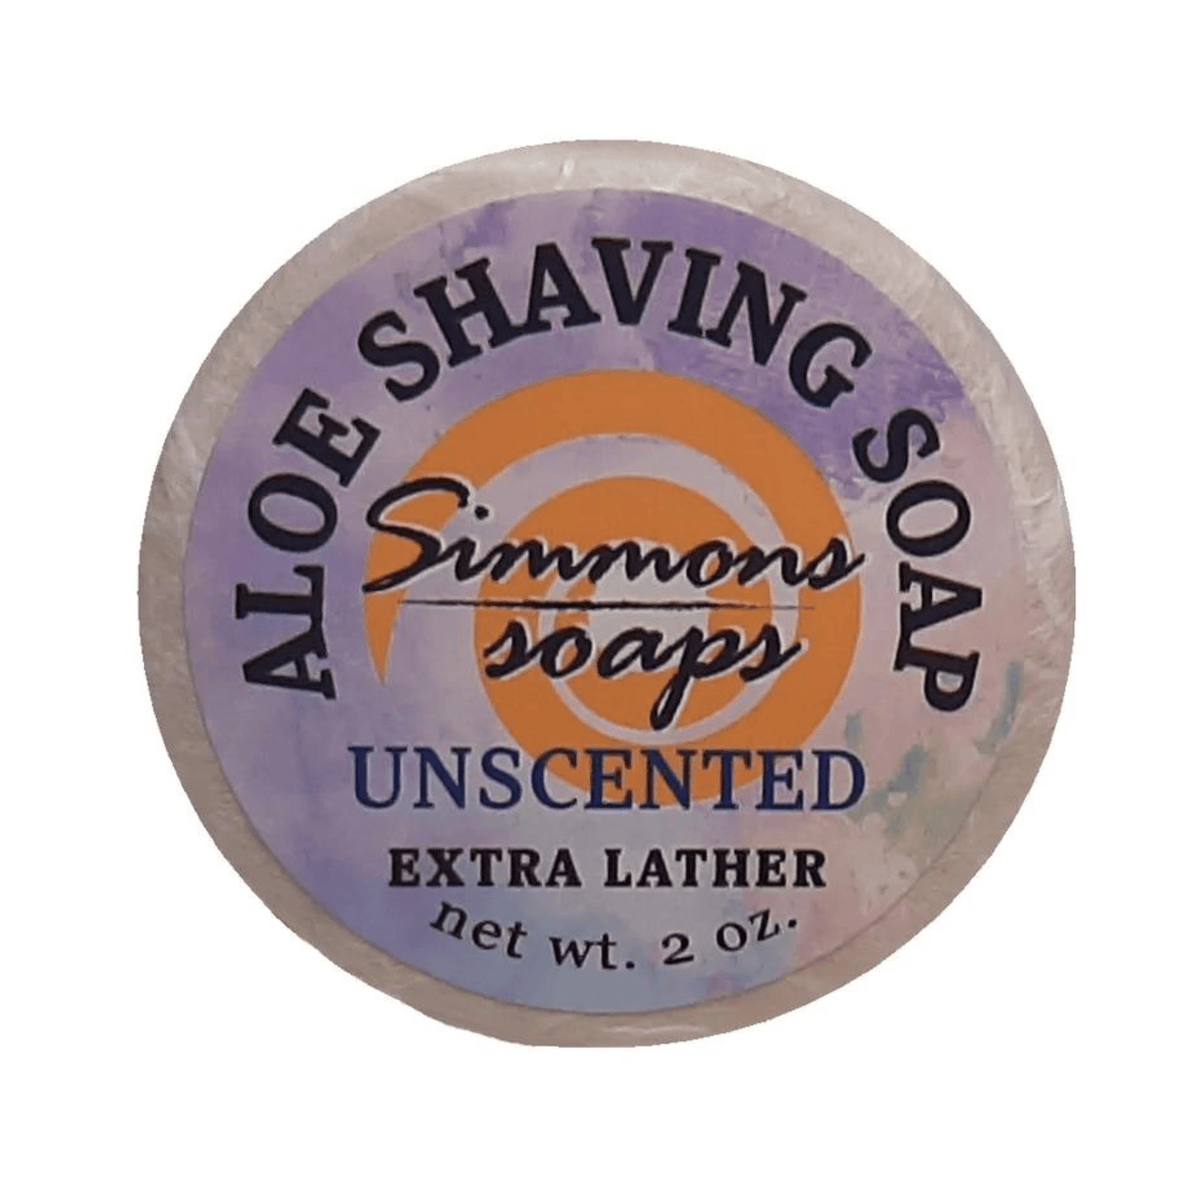 Primary Image of Unscented Shaving Soap